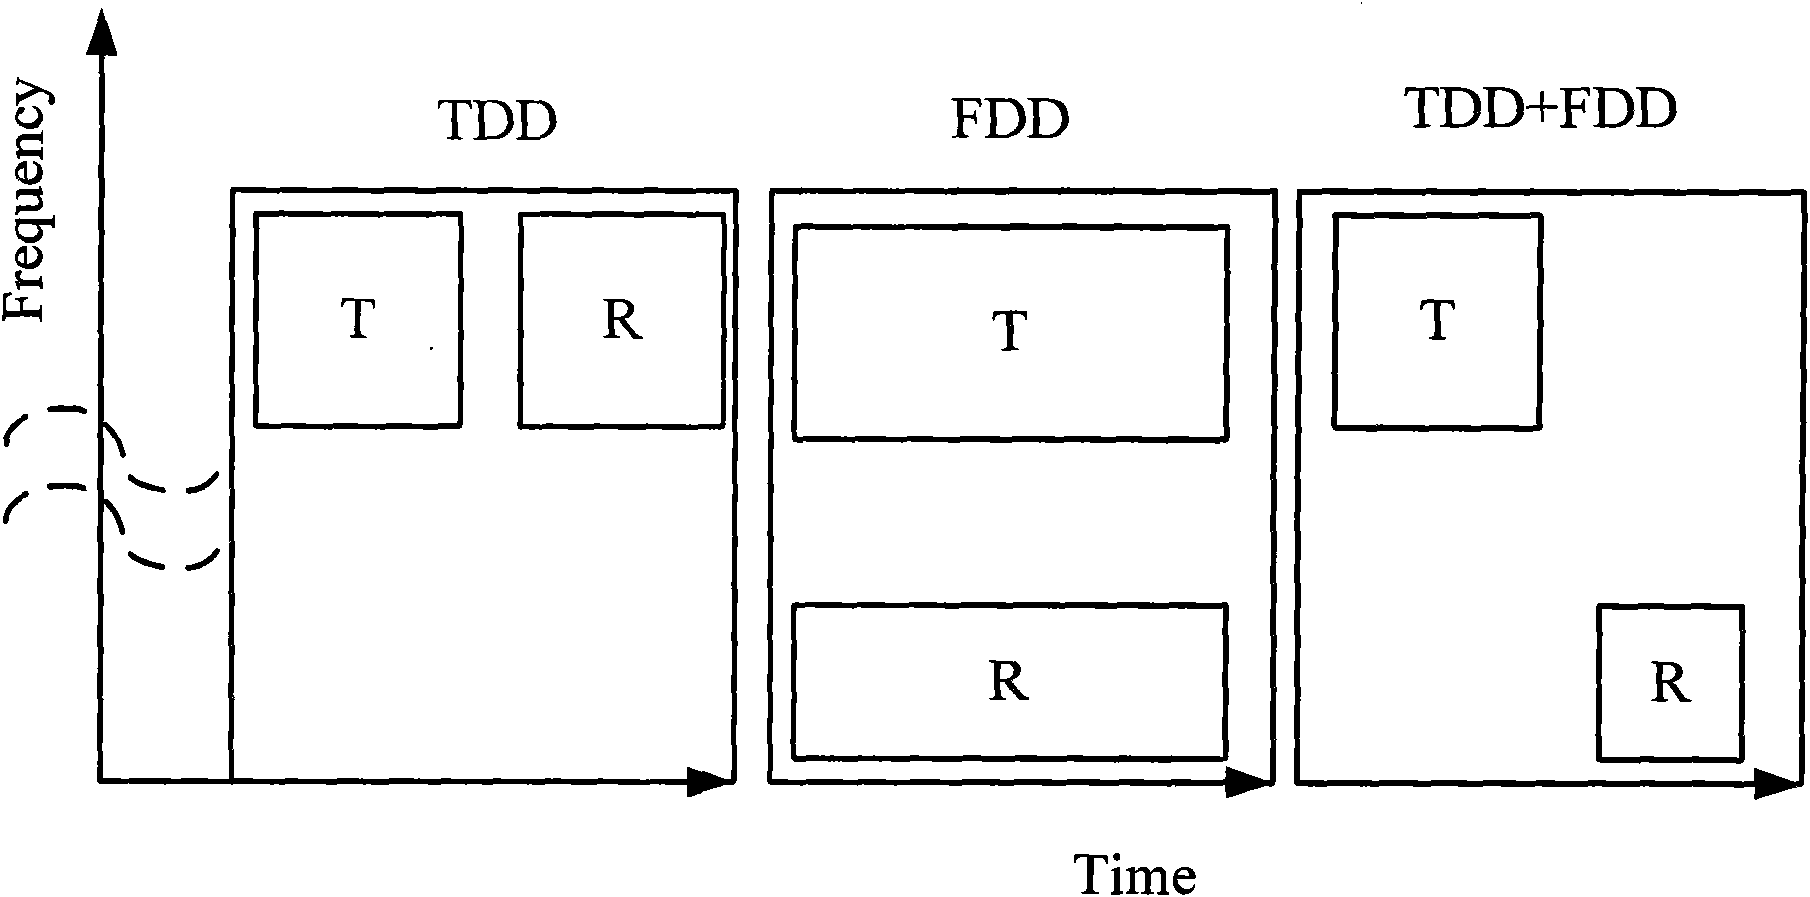 Cell search method and equipment